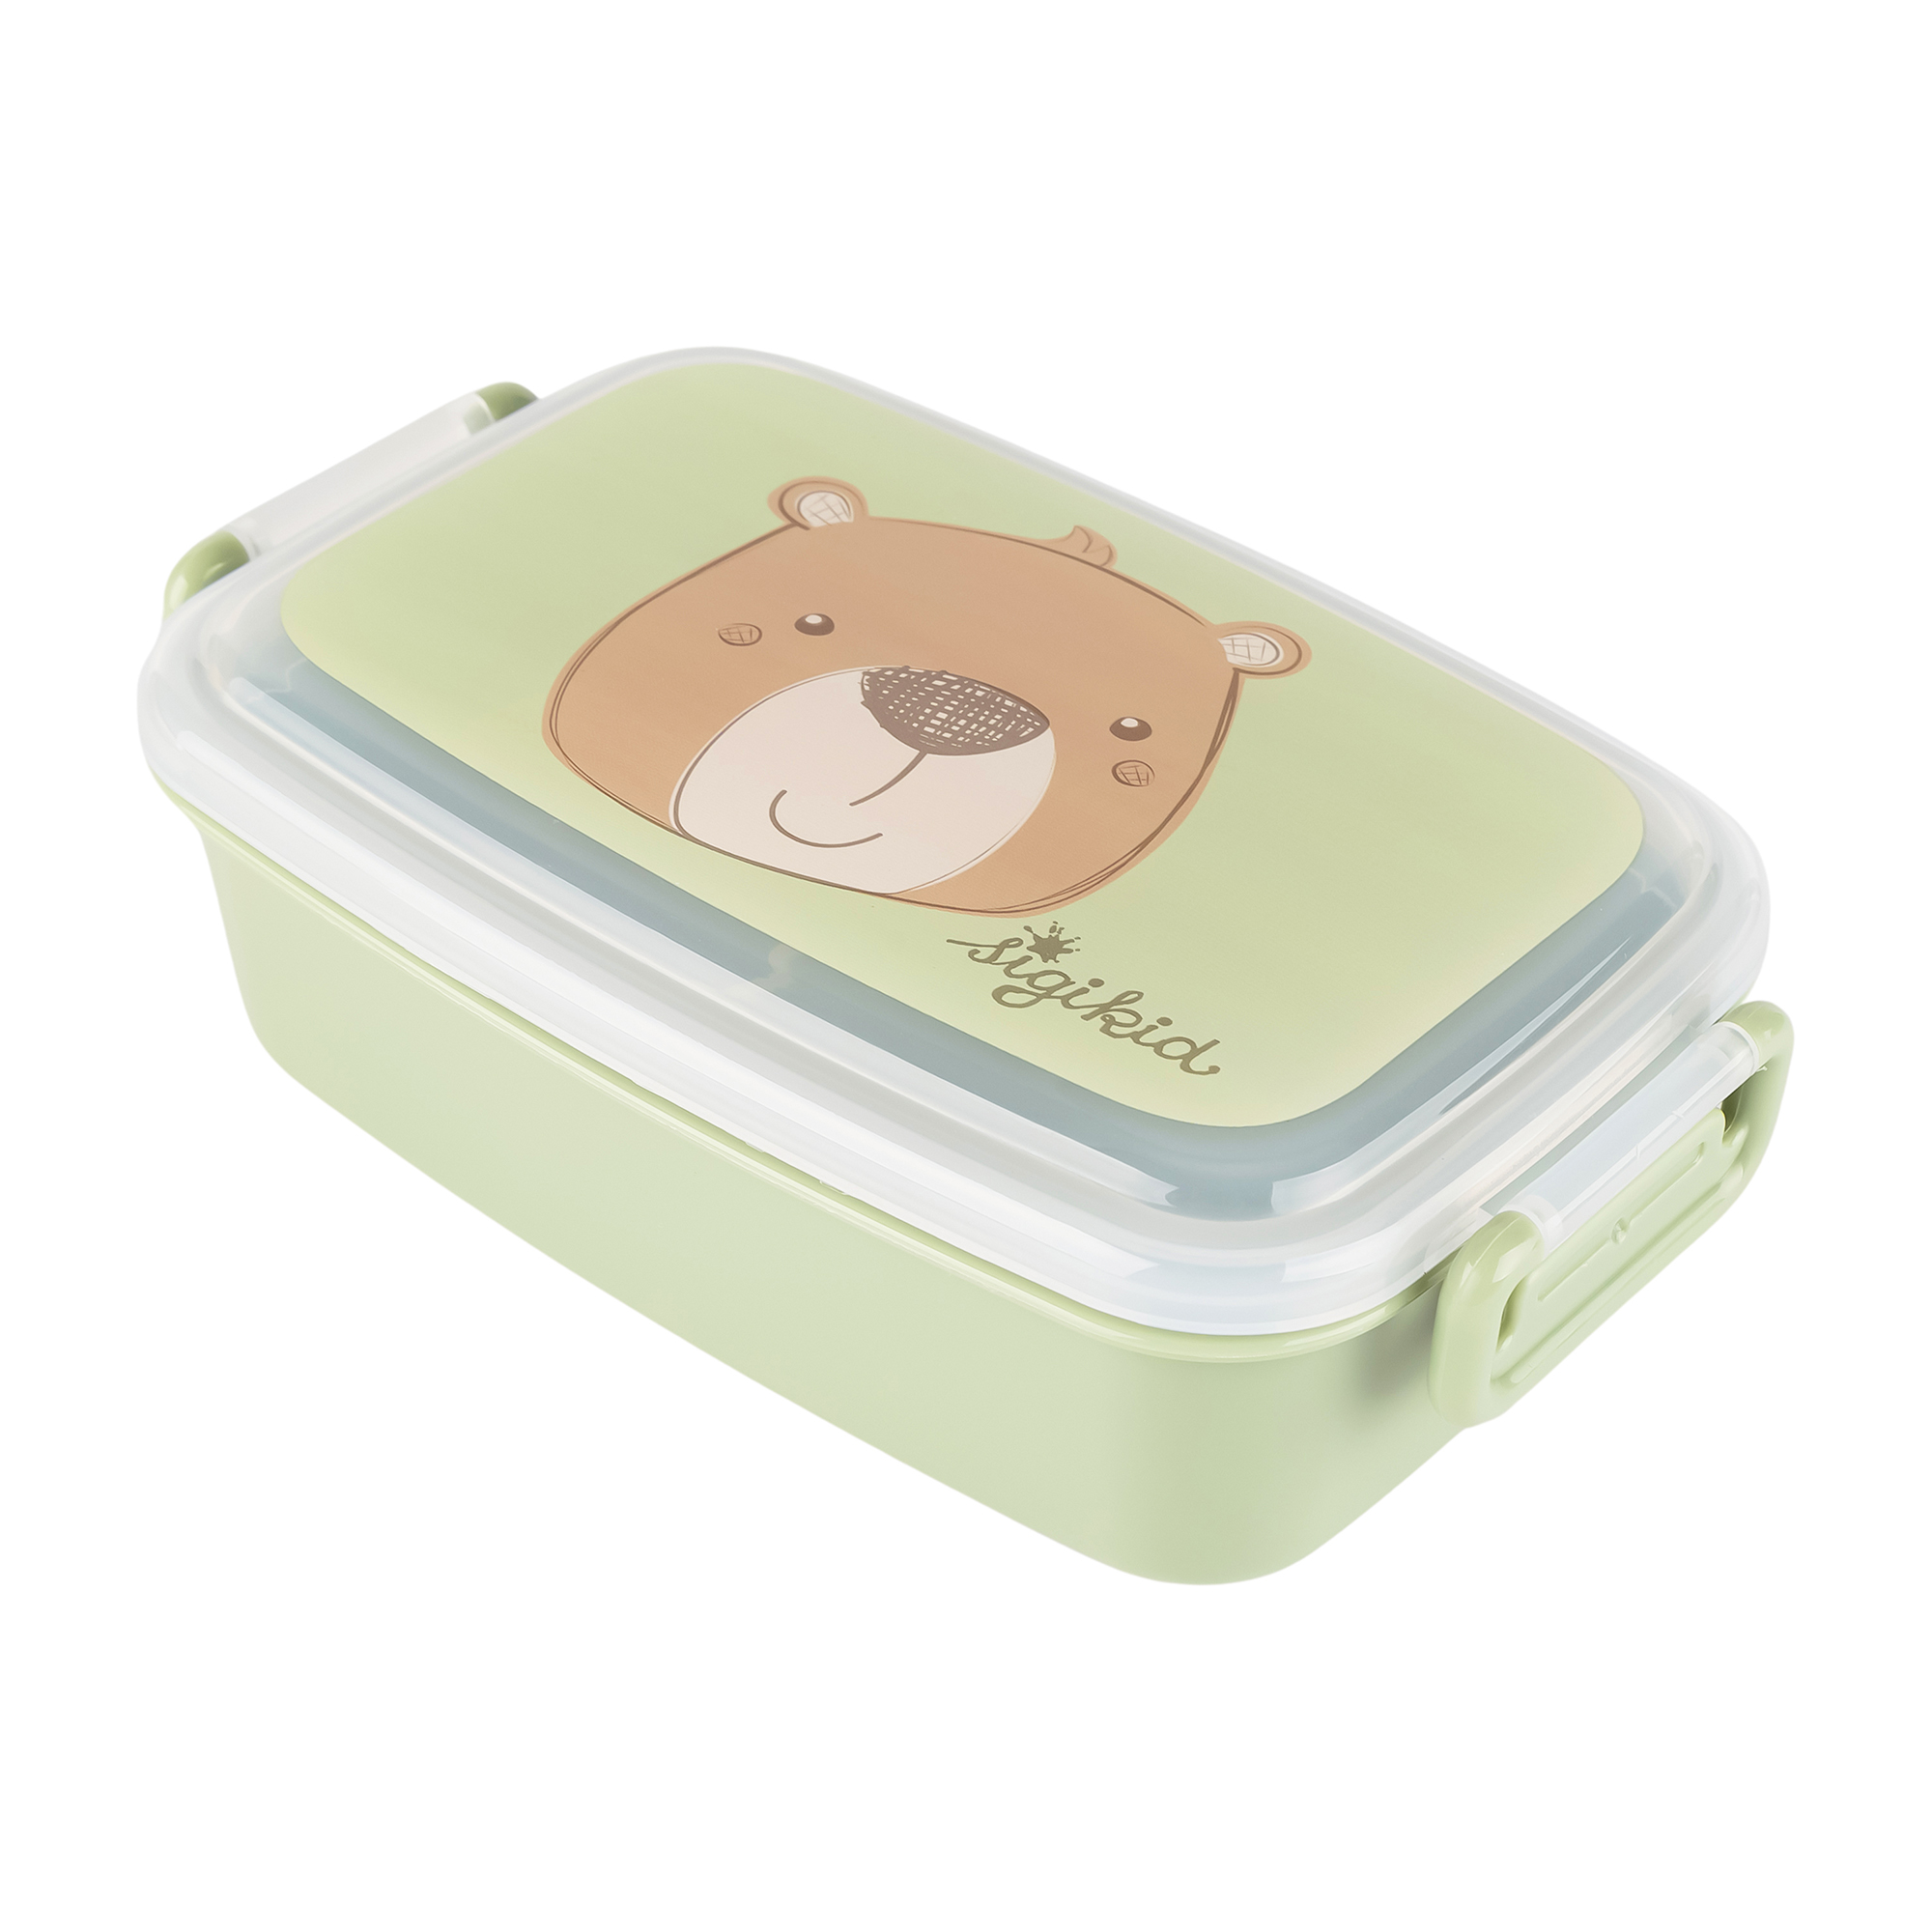 Lunchbox bear, removable partition inside